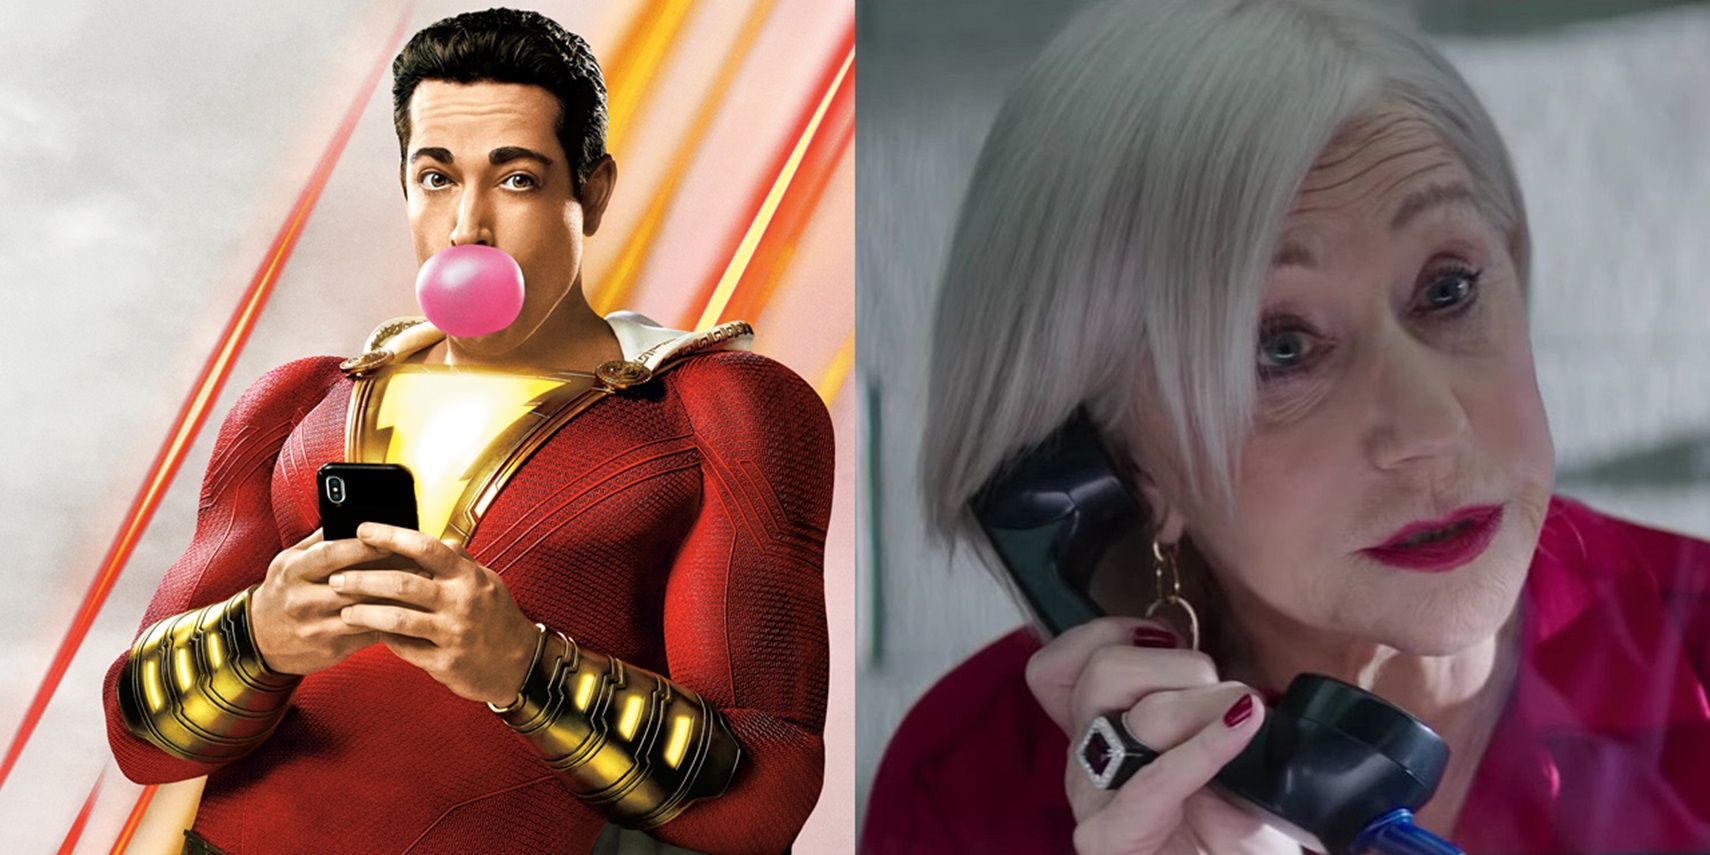 Split image of Zachary Levi in Shazam and Helen Mirren in The Fate of the Furious